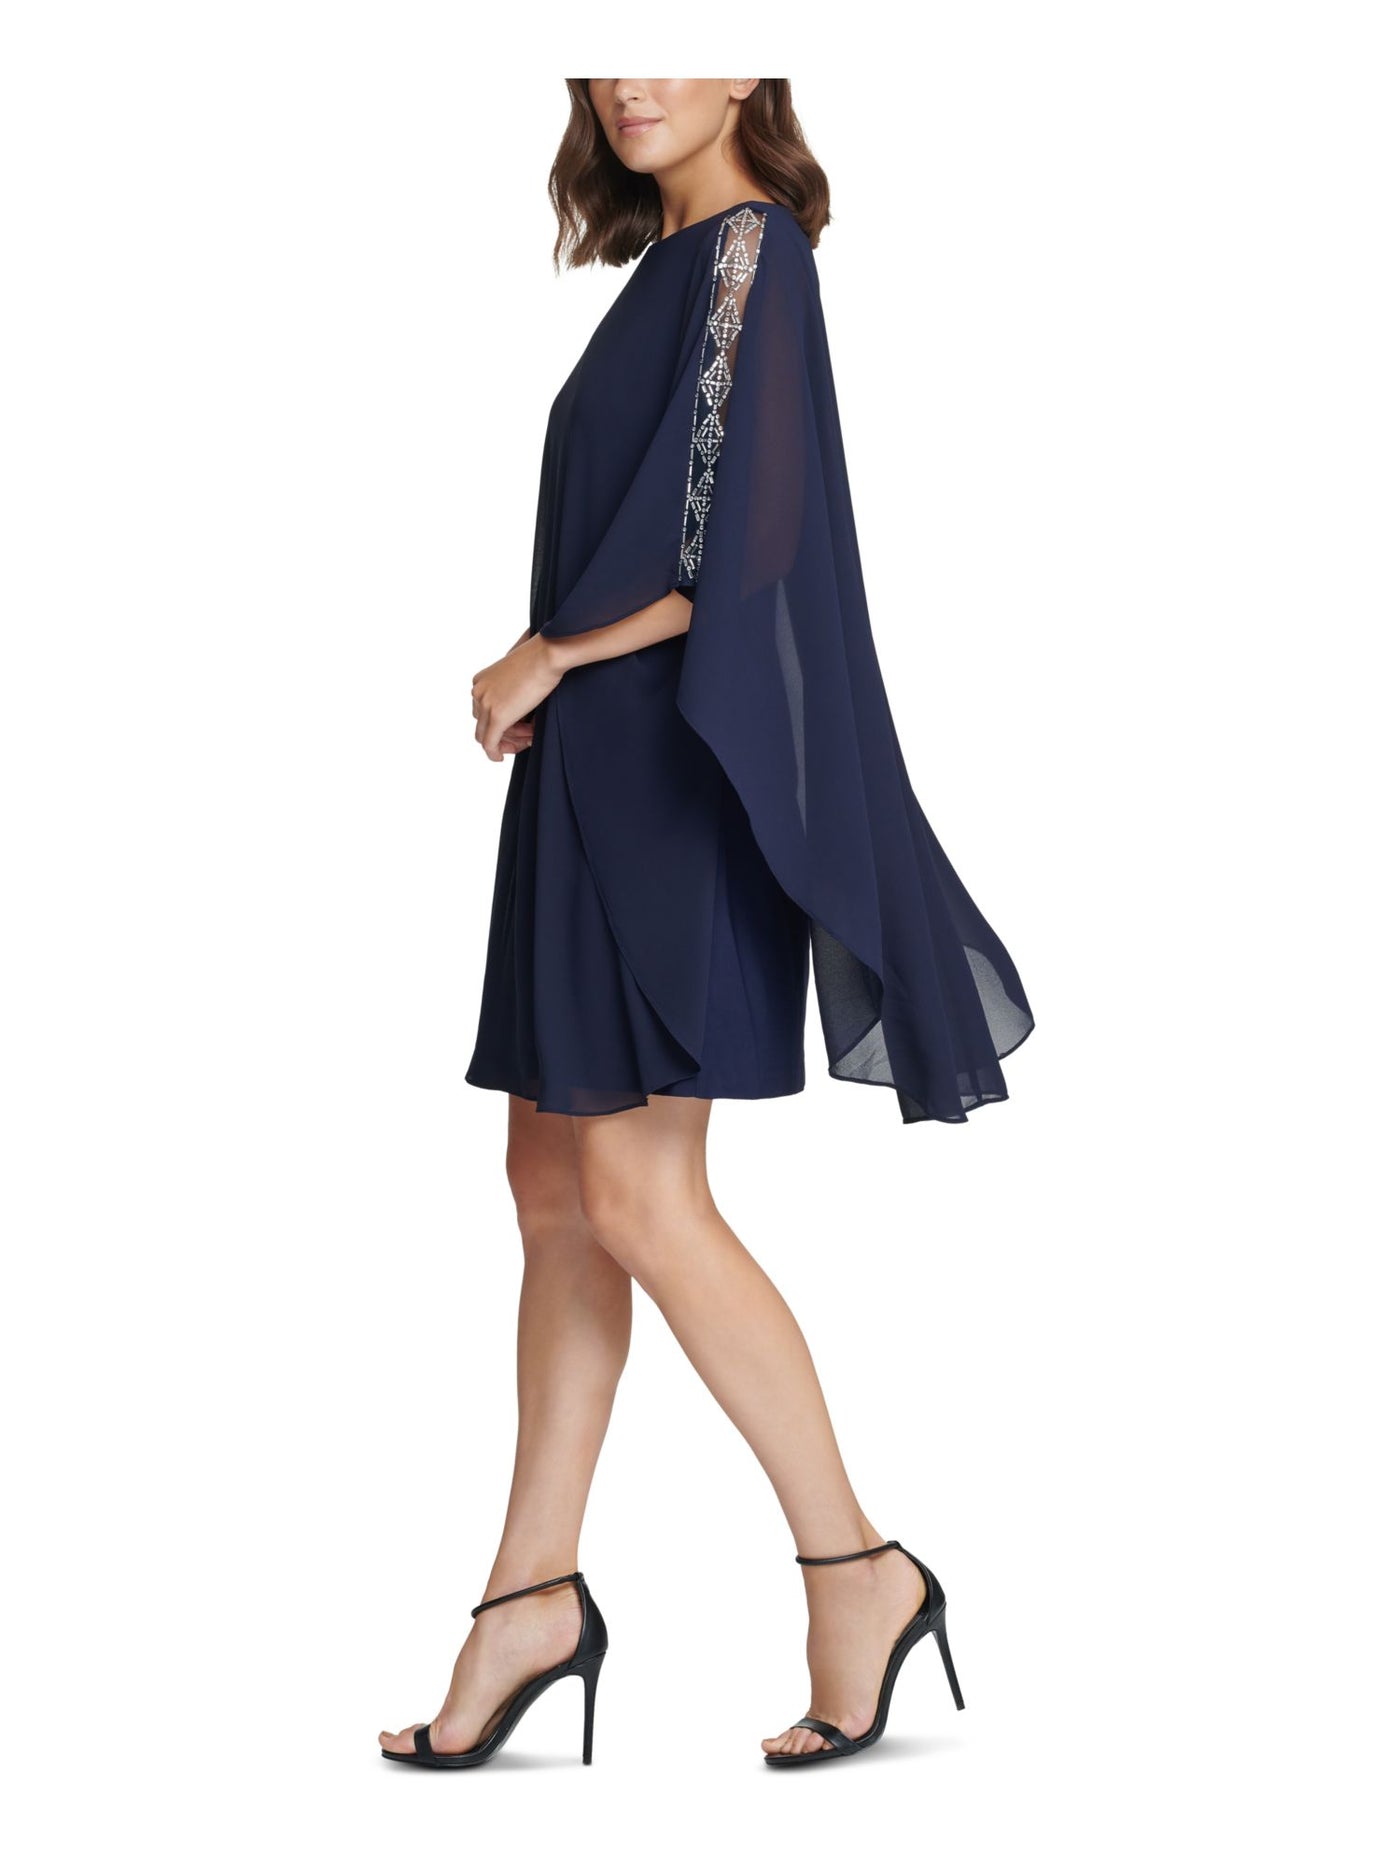 VINCE CAMUTO Womens Navy Zippered Embellished Cape Overlay Flutter Sleeve Round Neck Above The Knee Party Sheath Dress Petites 0P